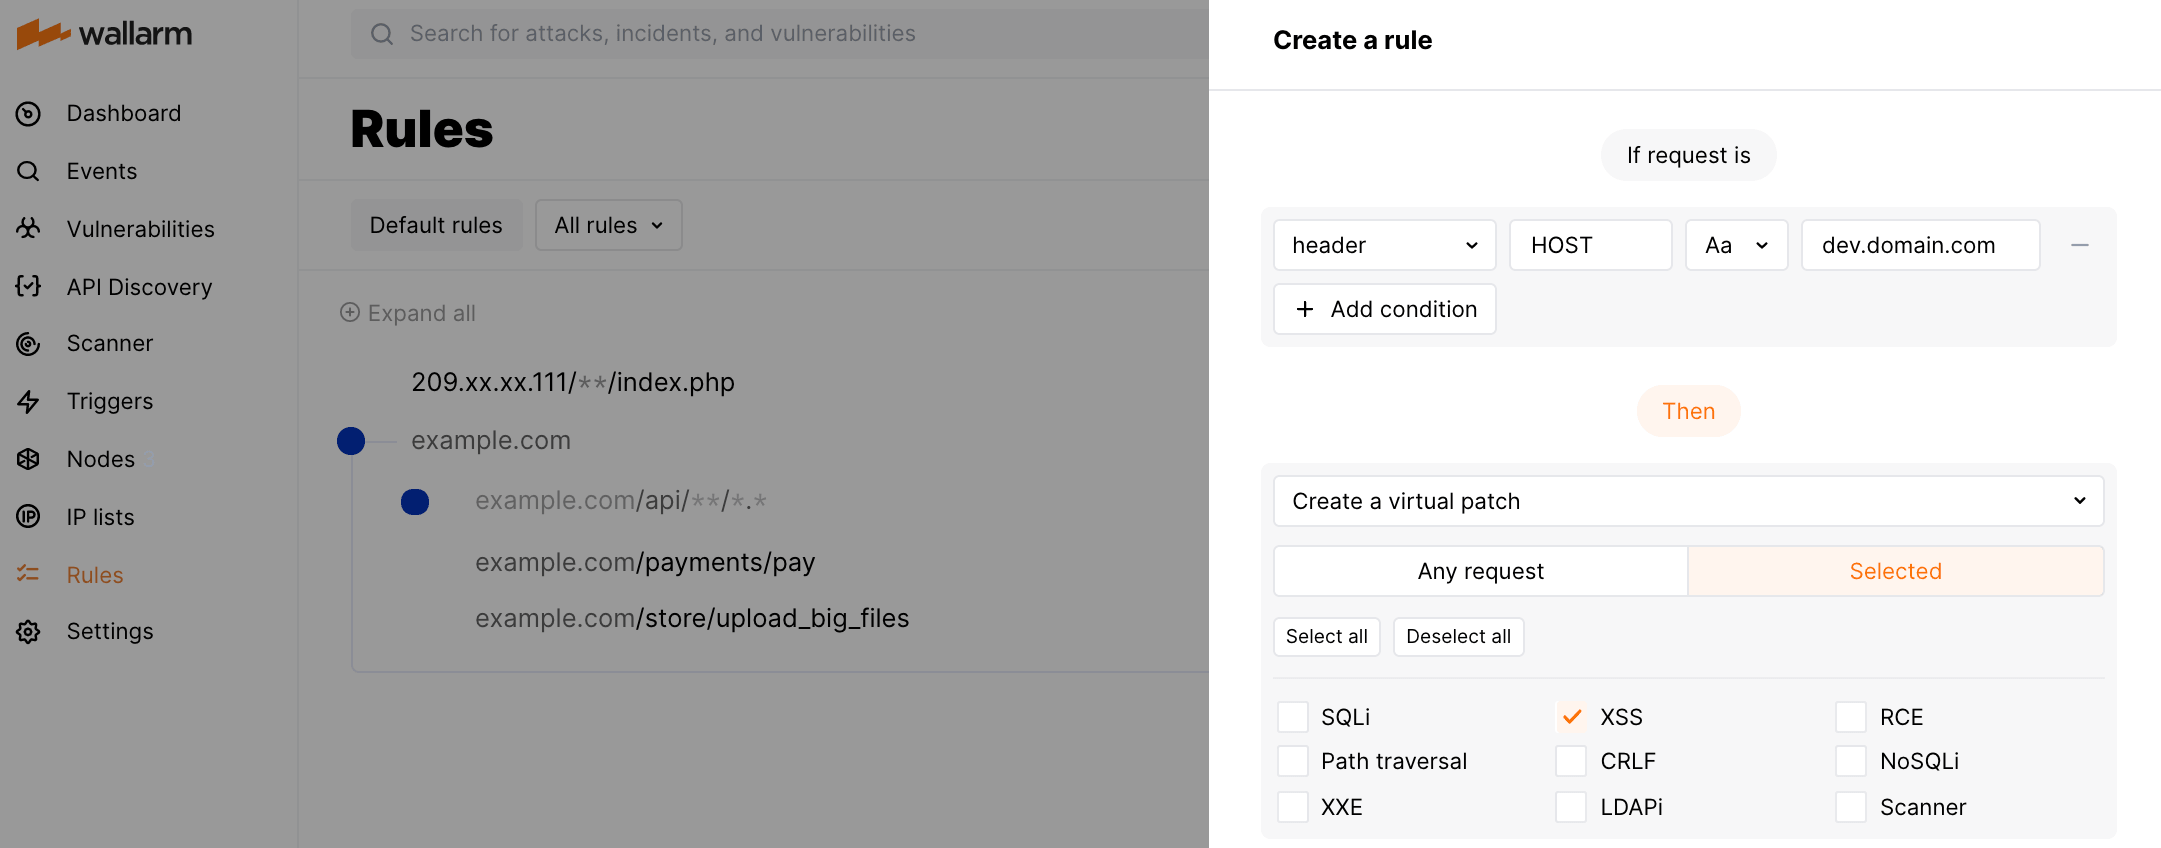 Creating rule for HOST